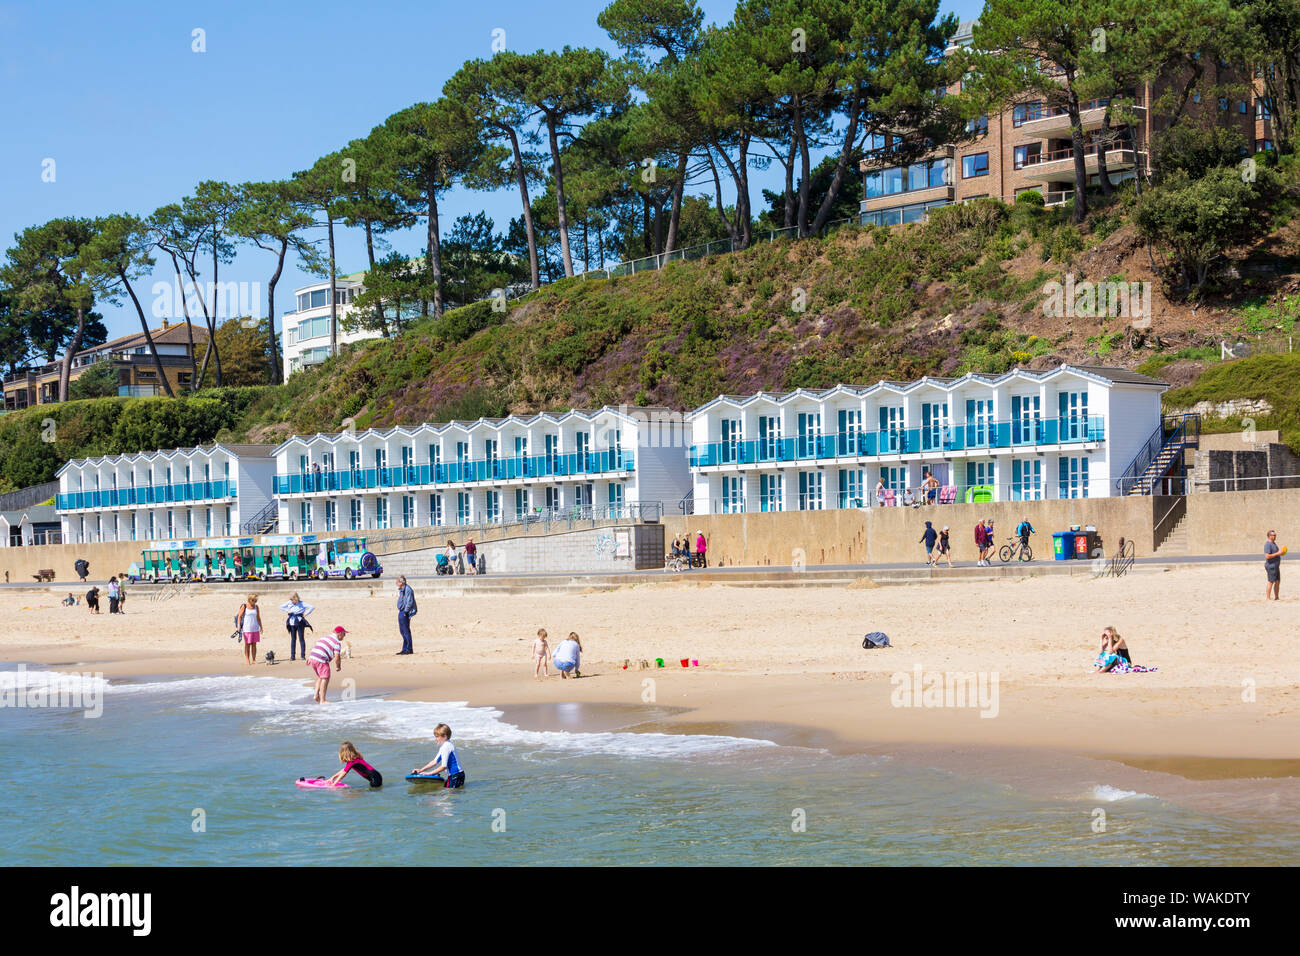 Beach and beach huts at Branksome Chine, Poole, Dorset UK on a warm sunny day in August Stock Photo